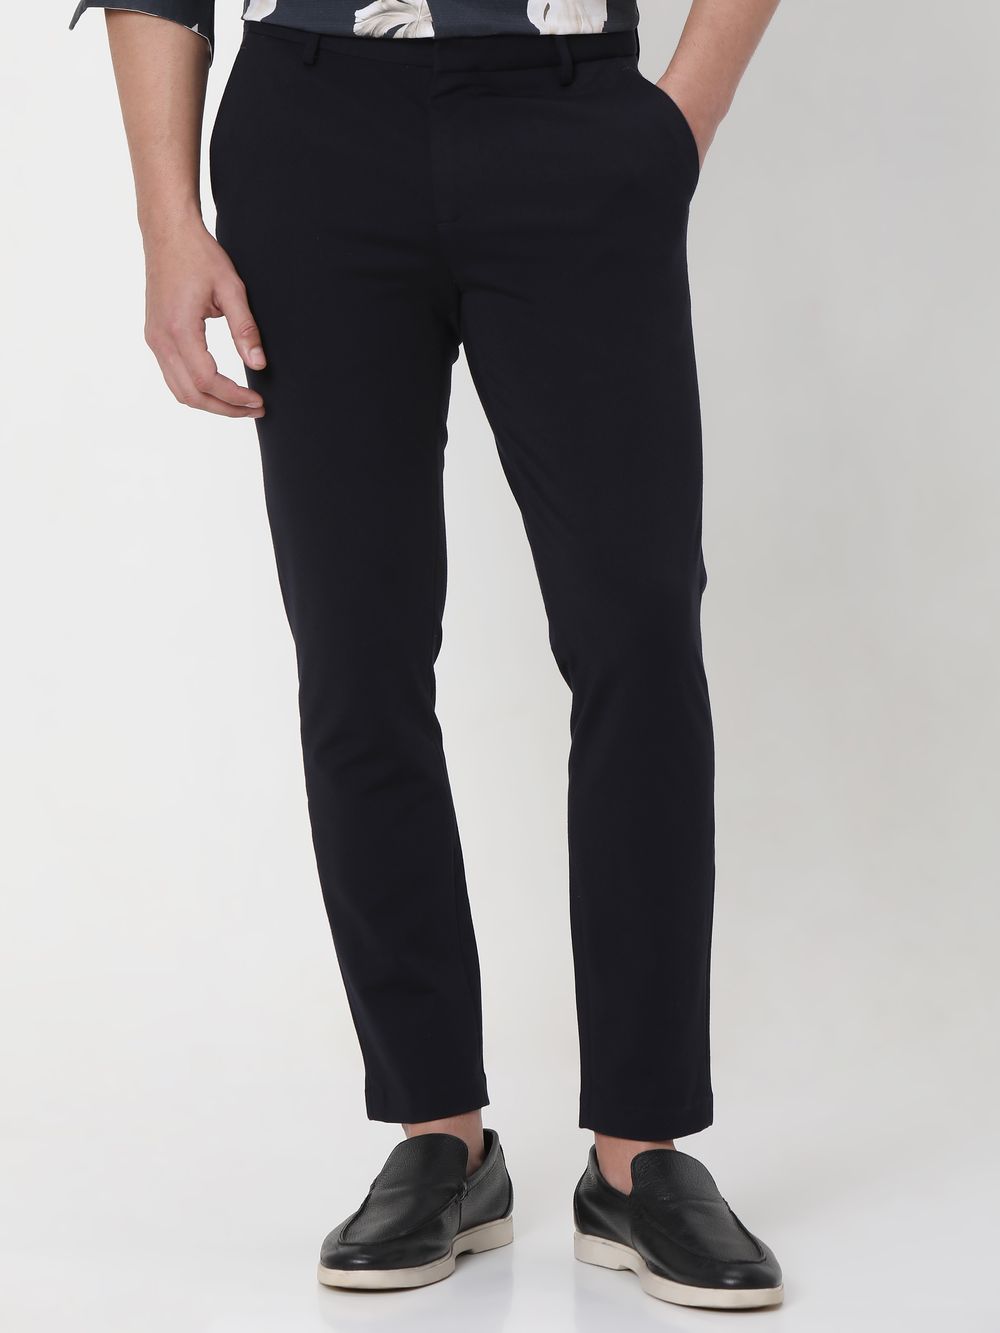 Navy Ankle Length Stretch Chinos Trouser